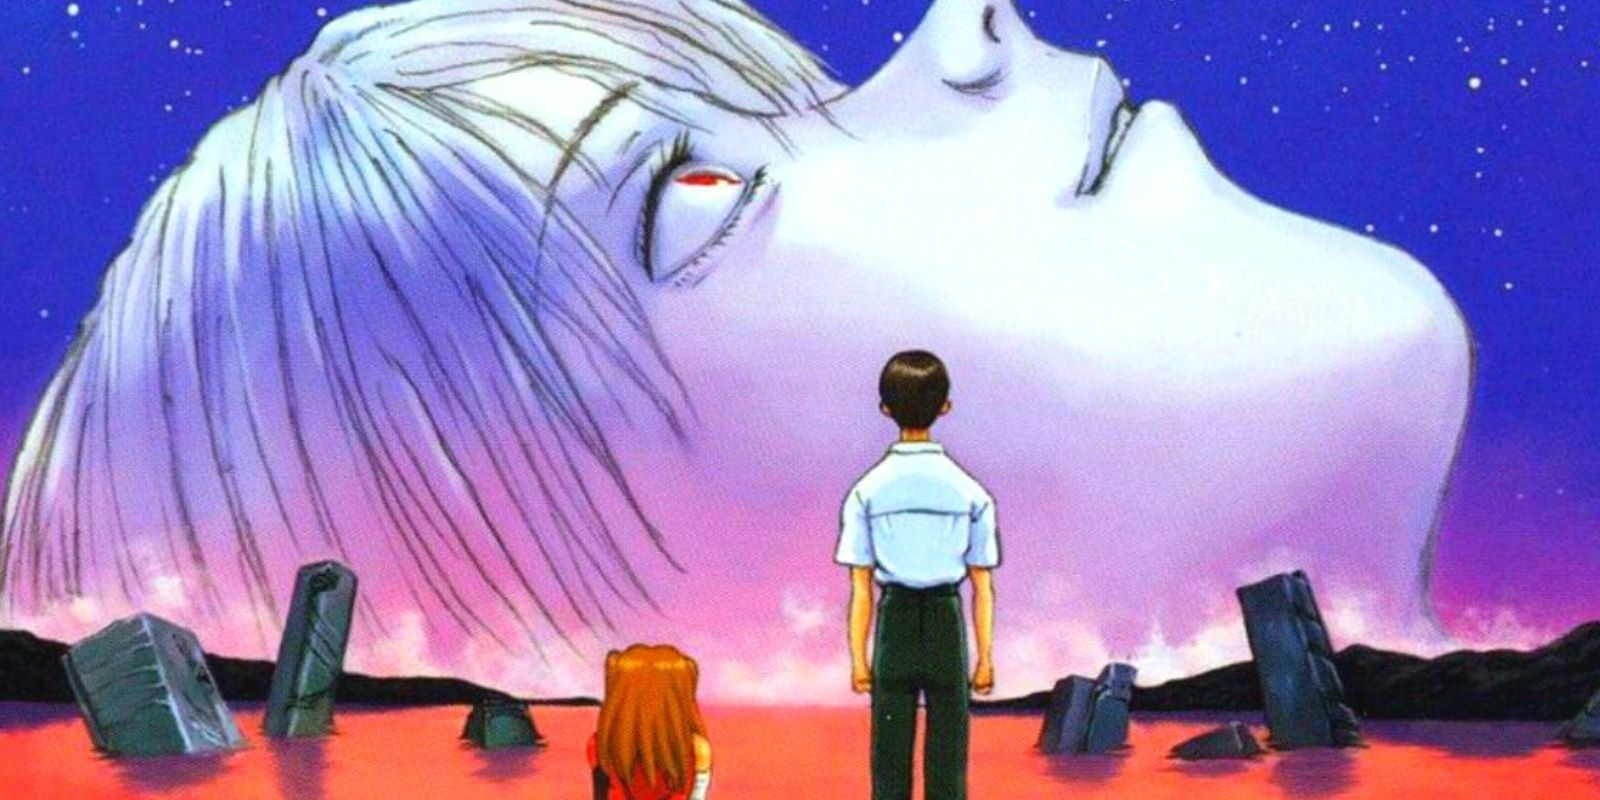 Scene from The End of Evangelion movie.